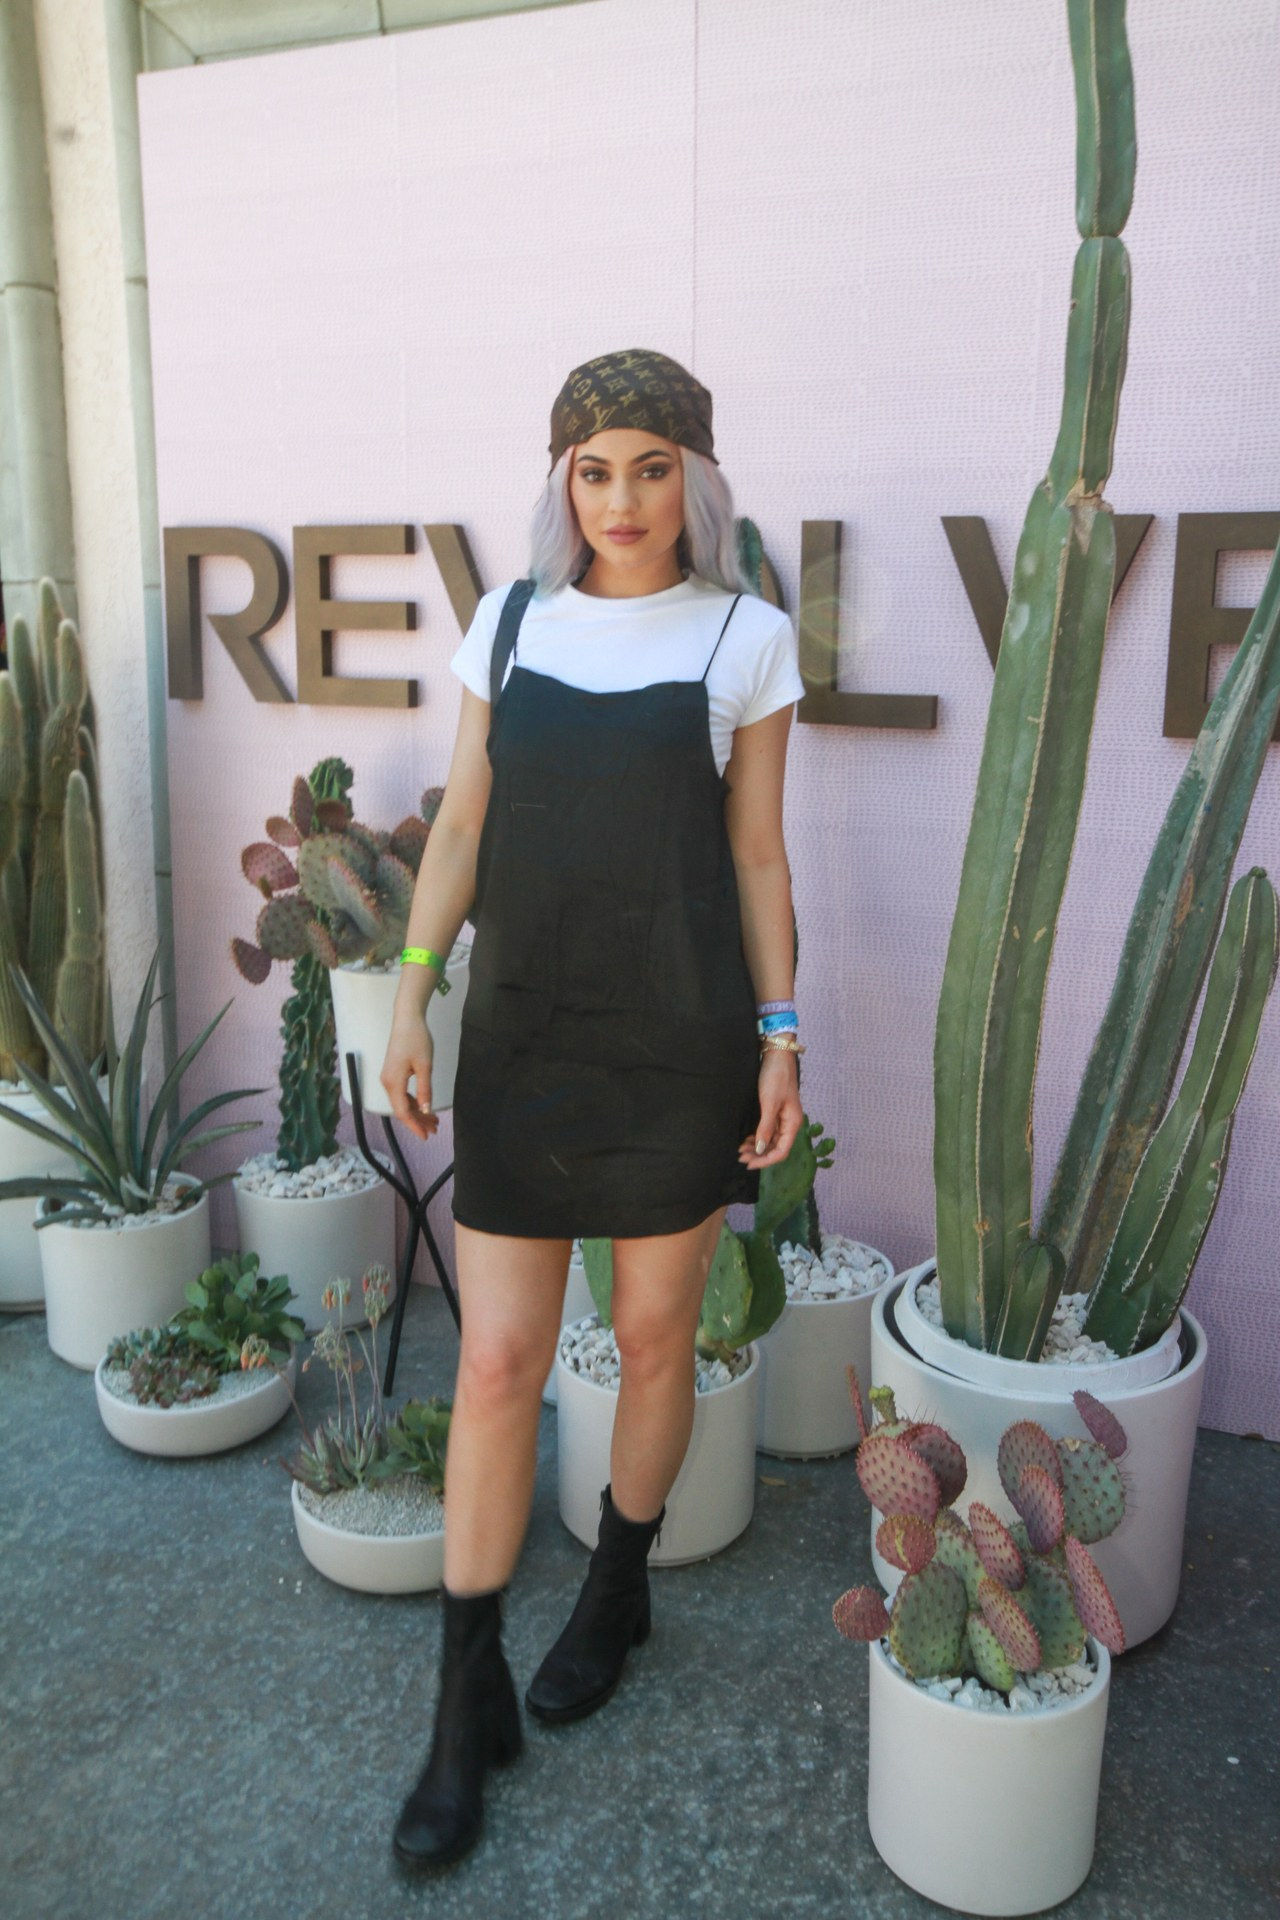 HÅNDFLADE SPRINGS, CA - APRIL 17: Kylie Jenner attends REVOLVE Desert House on April 17, 2016 at on April 17, 2016 in Palm Springs, California. (Photo by Thaddaeus McAdams/FilmMagic)